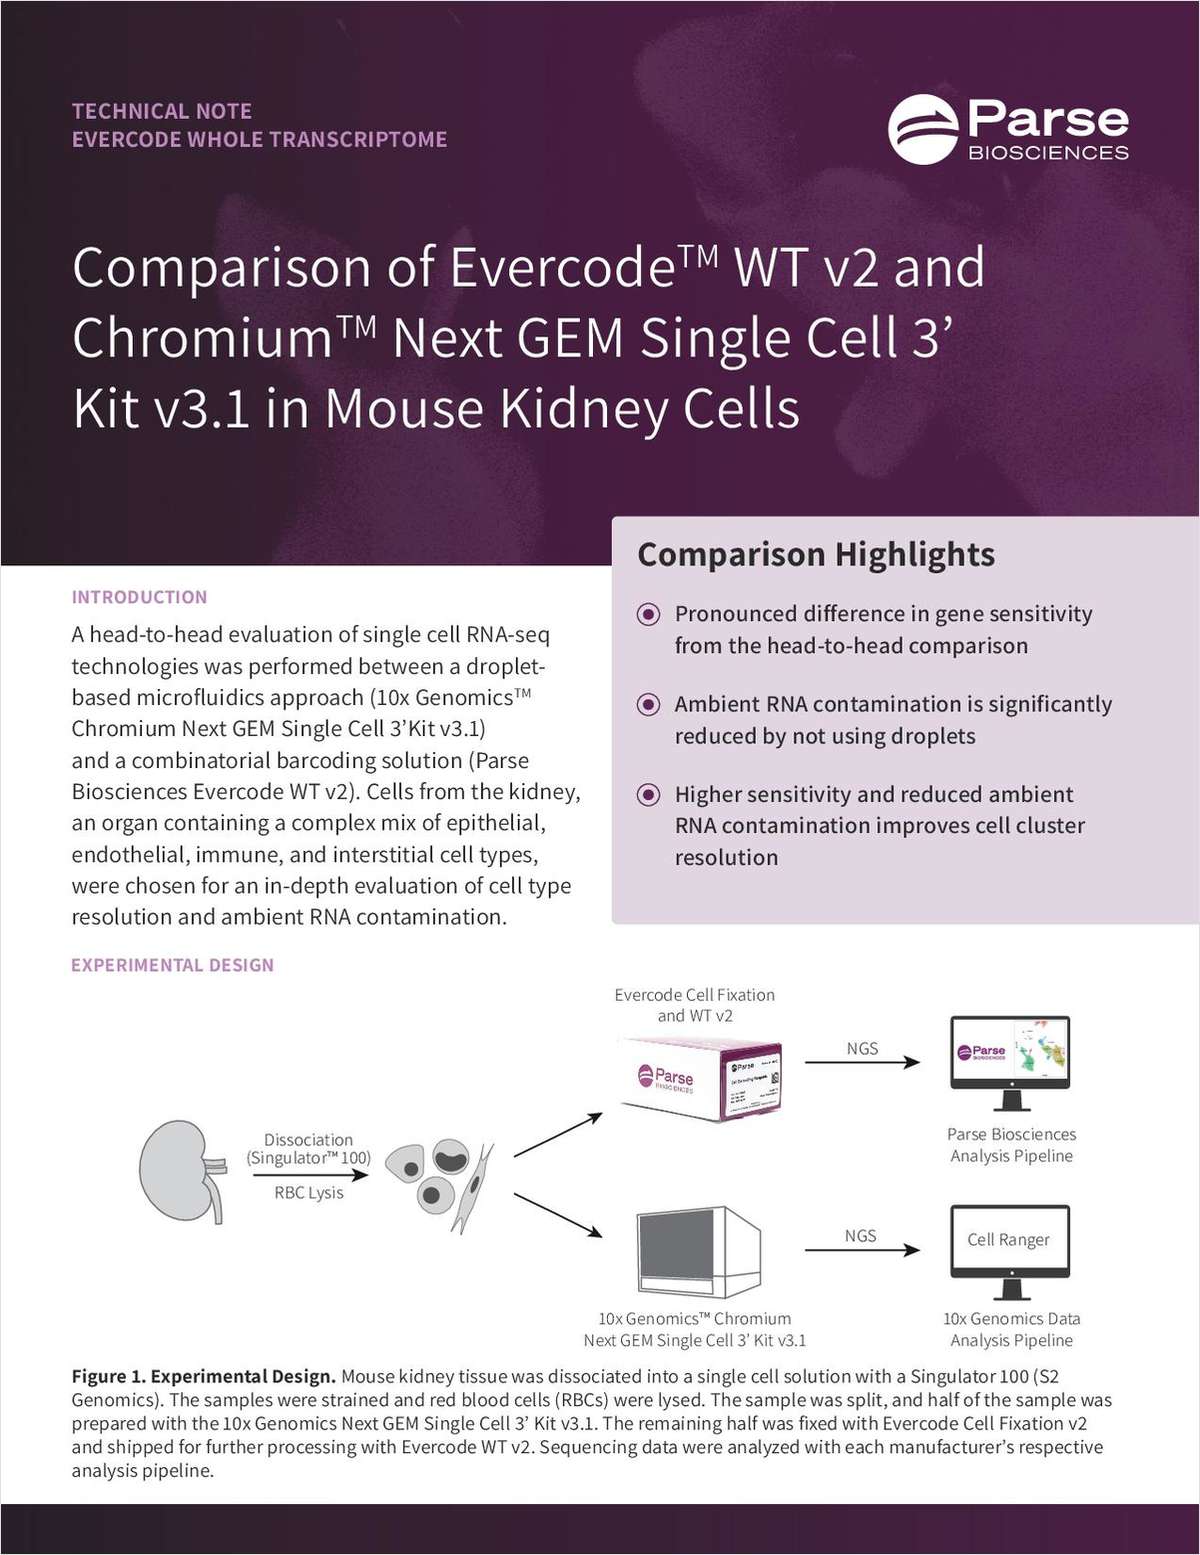 Ambient RNA Cross-Contamination Comparison Between Evercode WT v2 and Chromium Next GEM Single Cell 3' Kit v3.1 in Mouse Kidney Cells